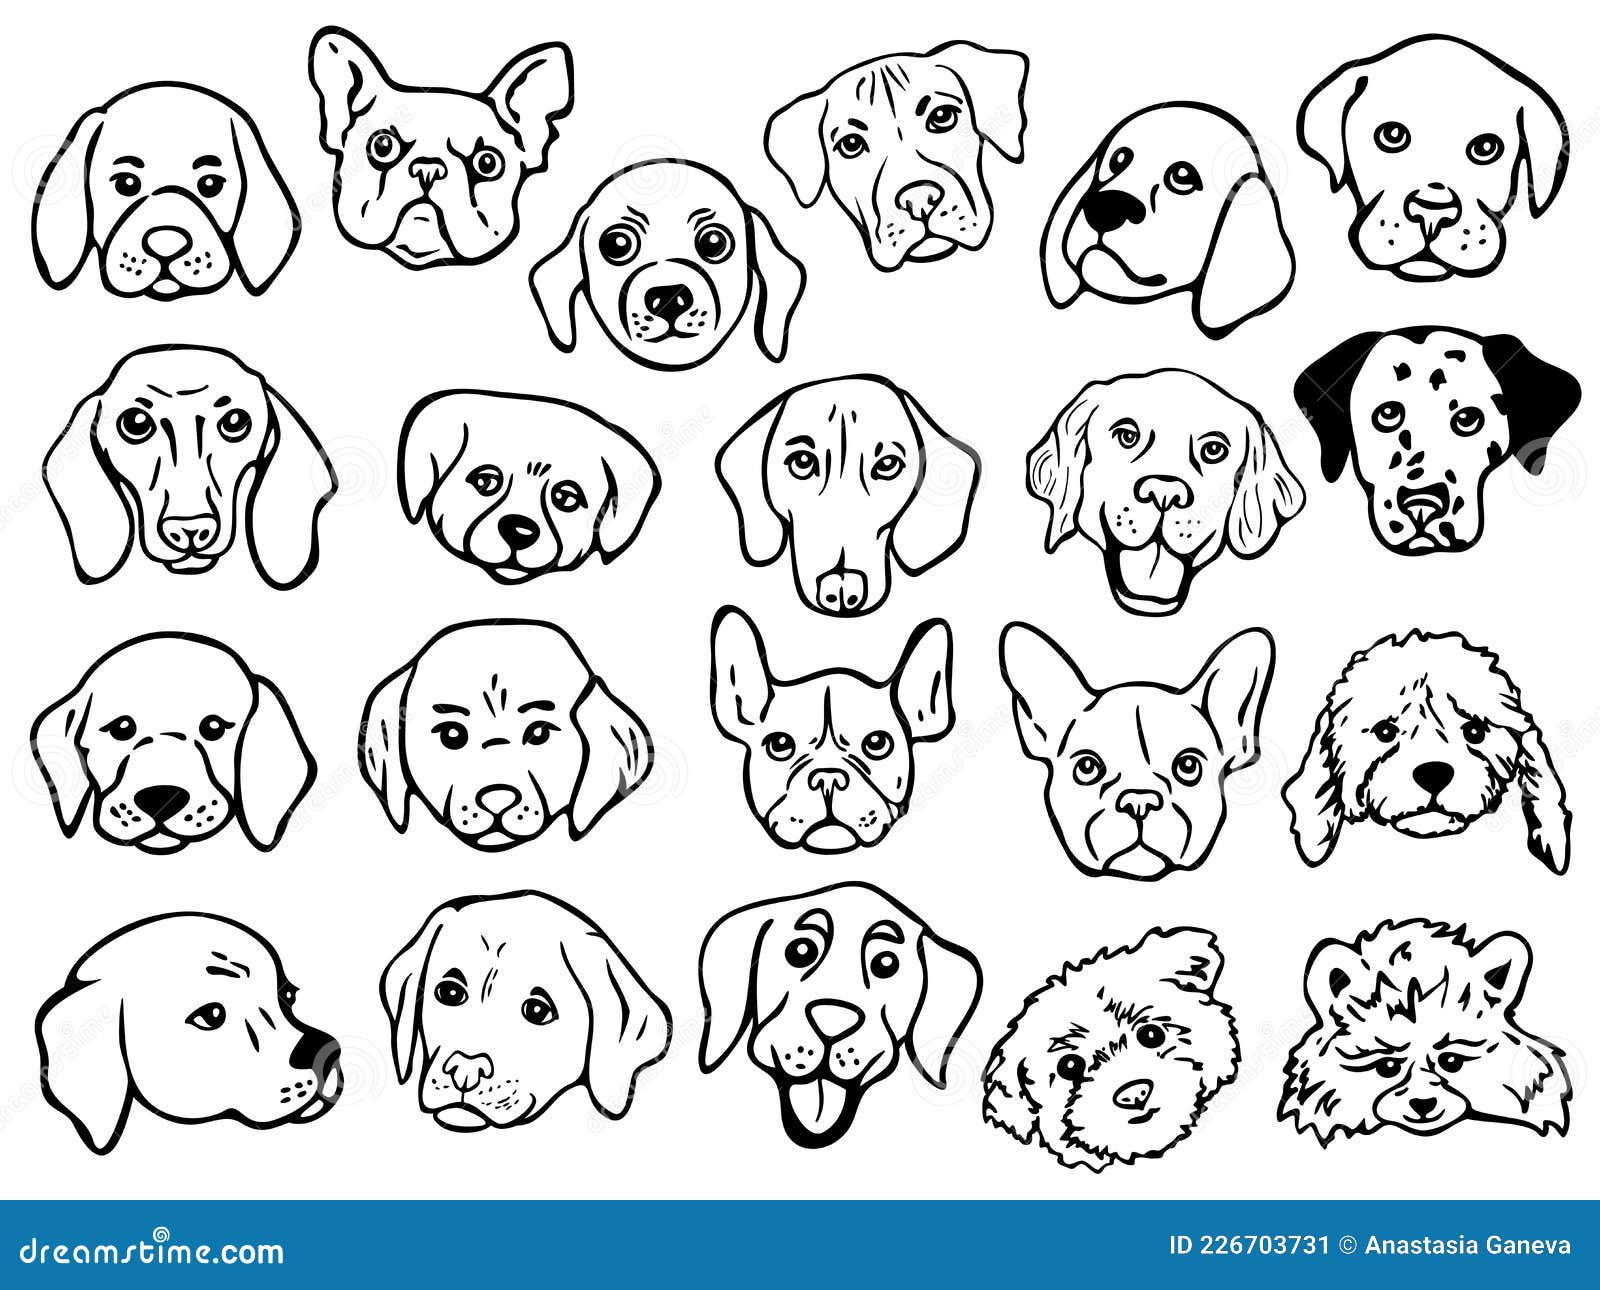   set with outlines of different breeds dog faces.